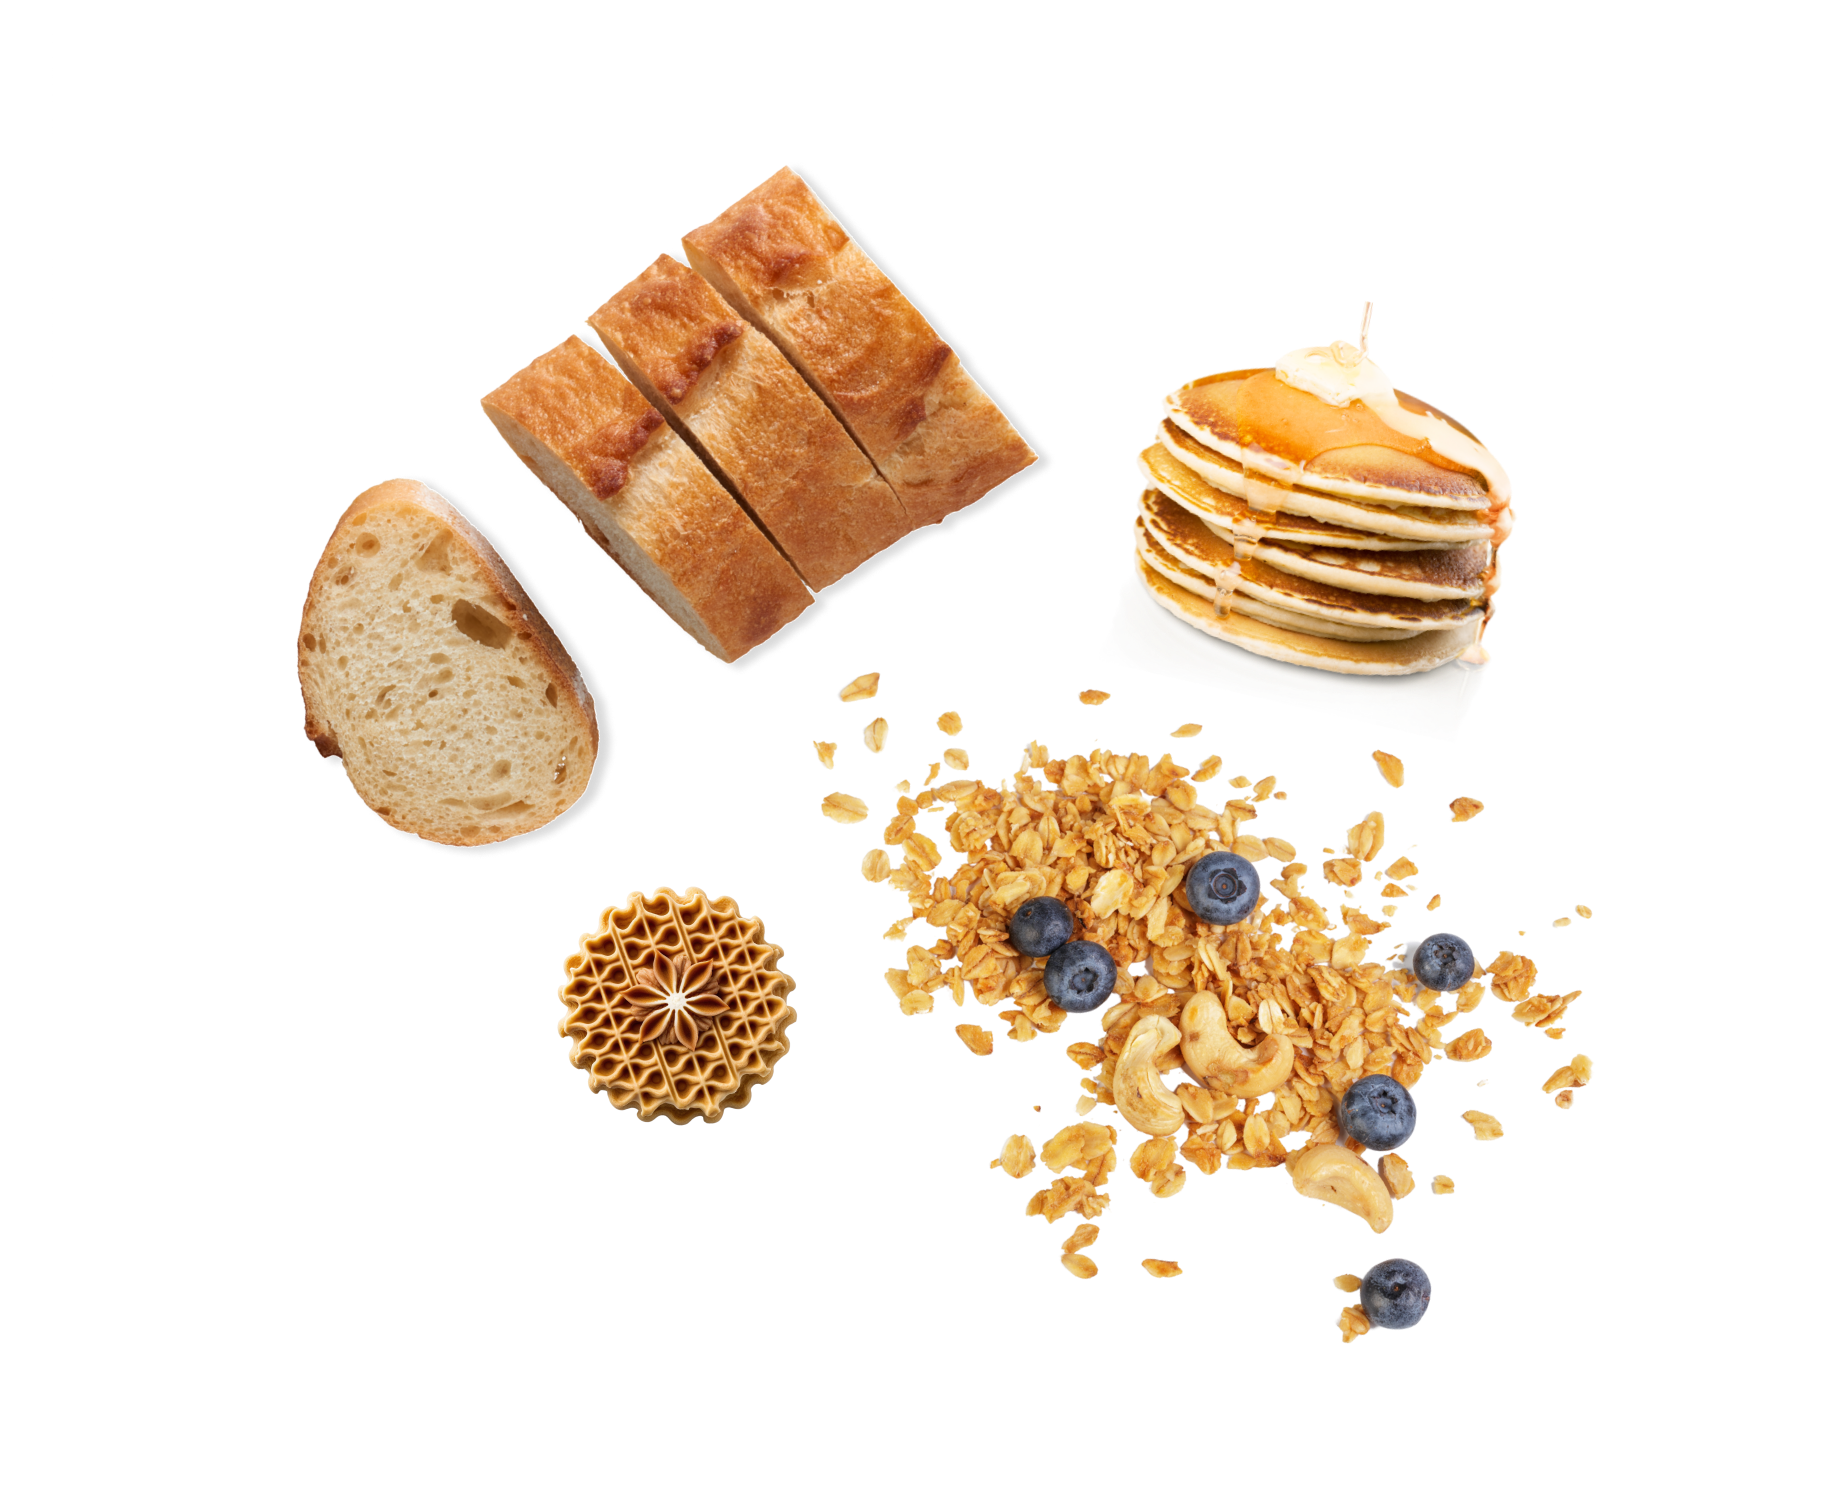 Baked goods such as bread, pancakes, waffles, grains, cashews, and blueberries are featured.